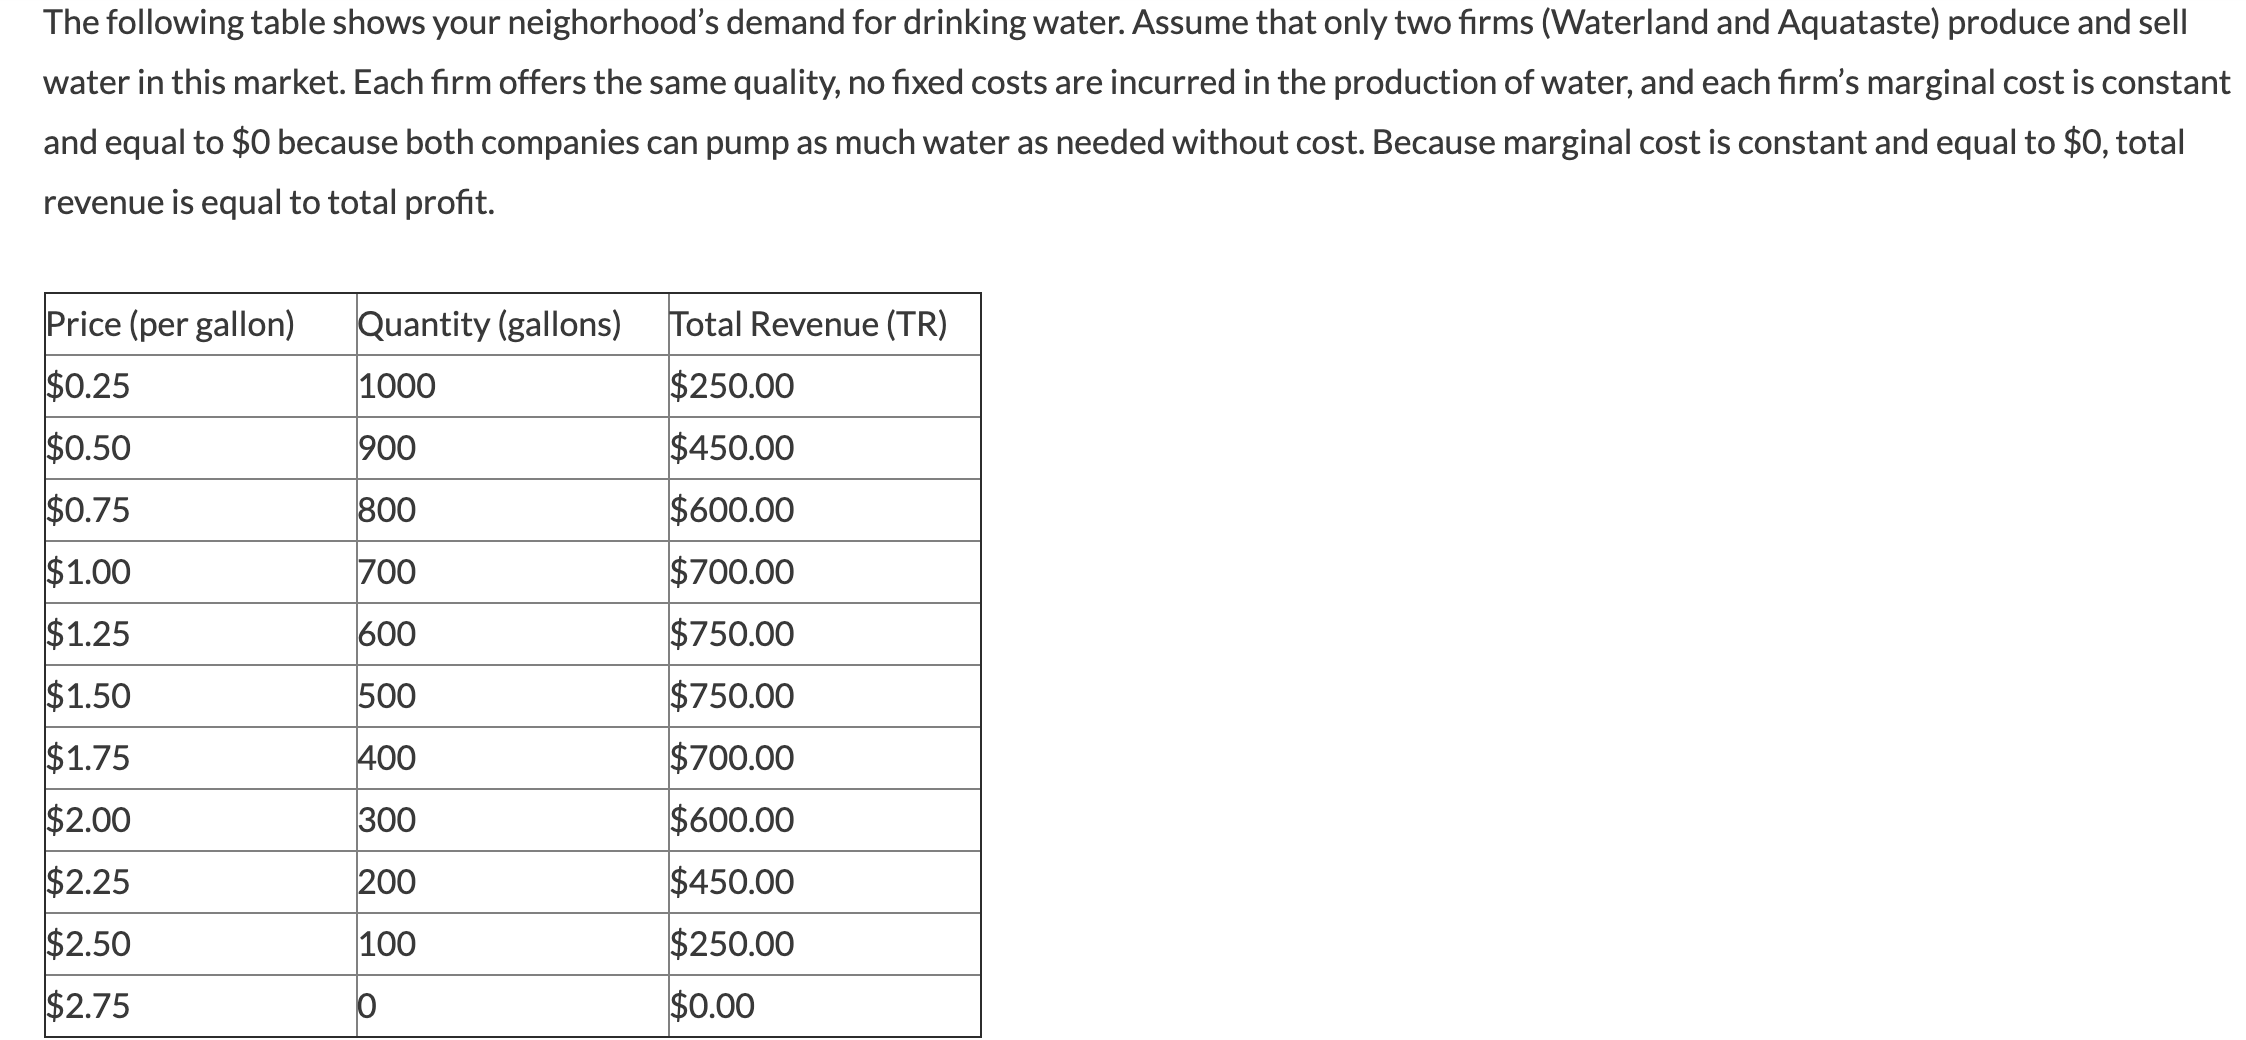 The following table shows your neighorhood's demand for drinking water. Assume that only two firms (Waterland and Aquataste) produce and sell
water in this market. Each firm offers the same quality, no fixed costs are incurred in the production of water, and each firm's marginal cost is constant
and equal to $0 because both companies can pump as much water as needed without cost. Because marginal cost is constant and equal to $0, total
revenue is equal to total profit.
Price (per gallon)
Quantity (gallons)
Total Revenue (TR)
$0.25
1000
$250.00
$0.50
900
$450.00
$0.75
800
$600.00
$1.00
700
$700.00
$1.25
600
$750.00
$1.50
500
$750.00
$1.75
400
$700.00
$2.00
300
$600.00
$2.25
200
$450.00
$2.50
100
$250.00
$2.75
$0.00
